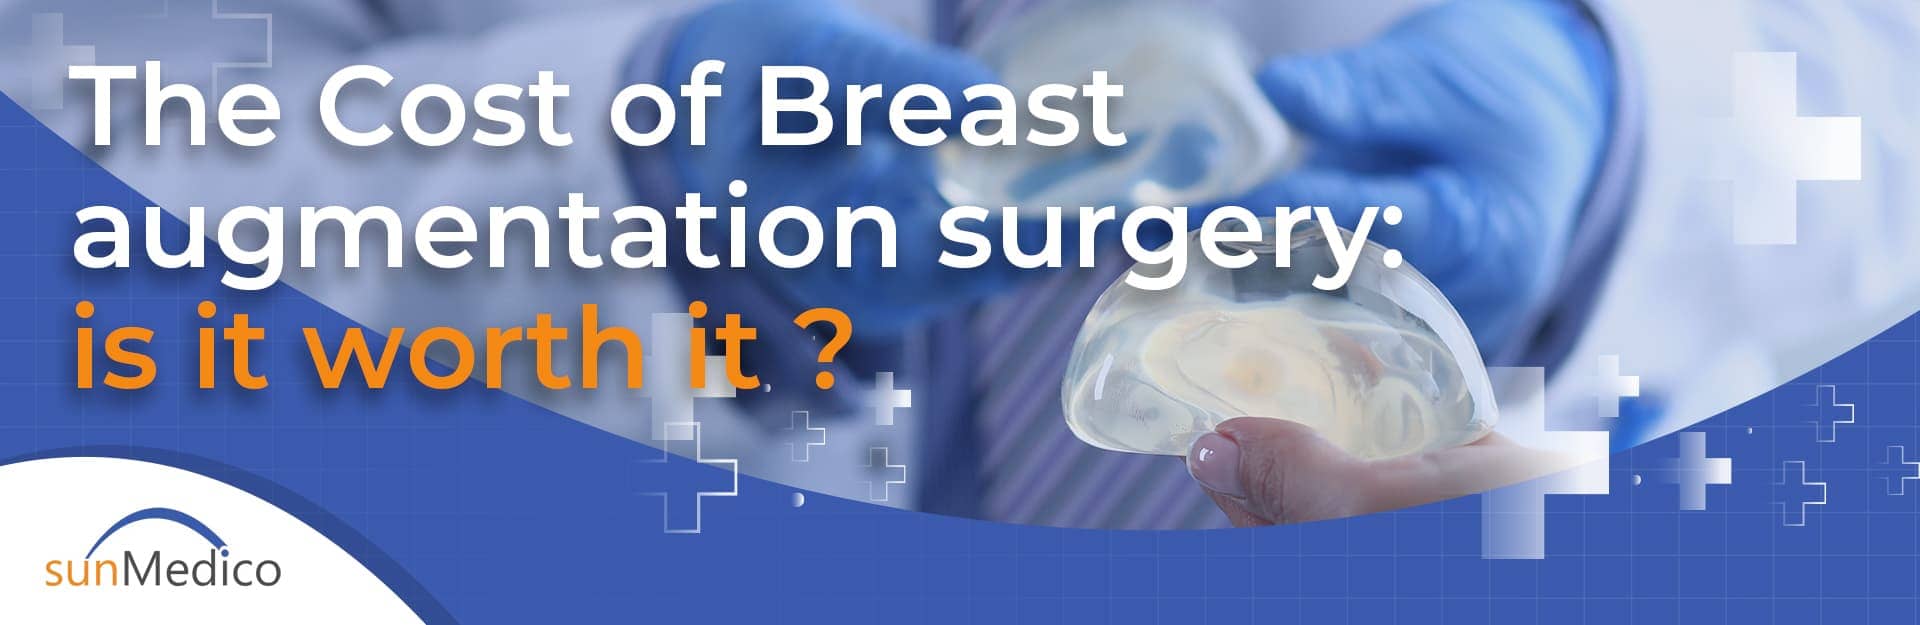 The Cost of Breast Augmentation Surgery: Is it worth it?